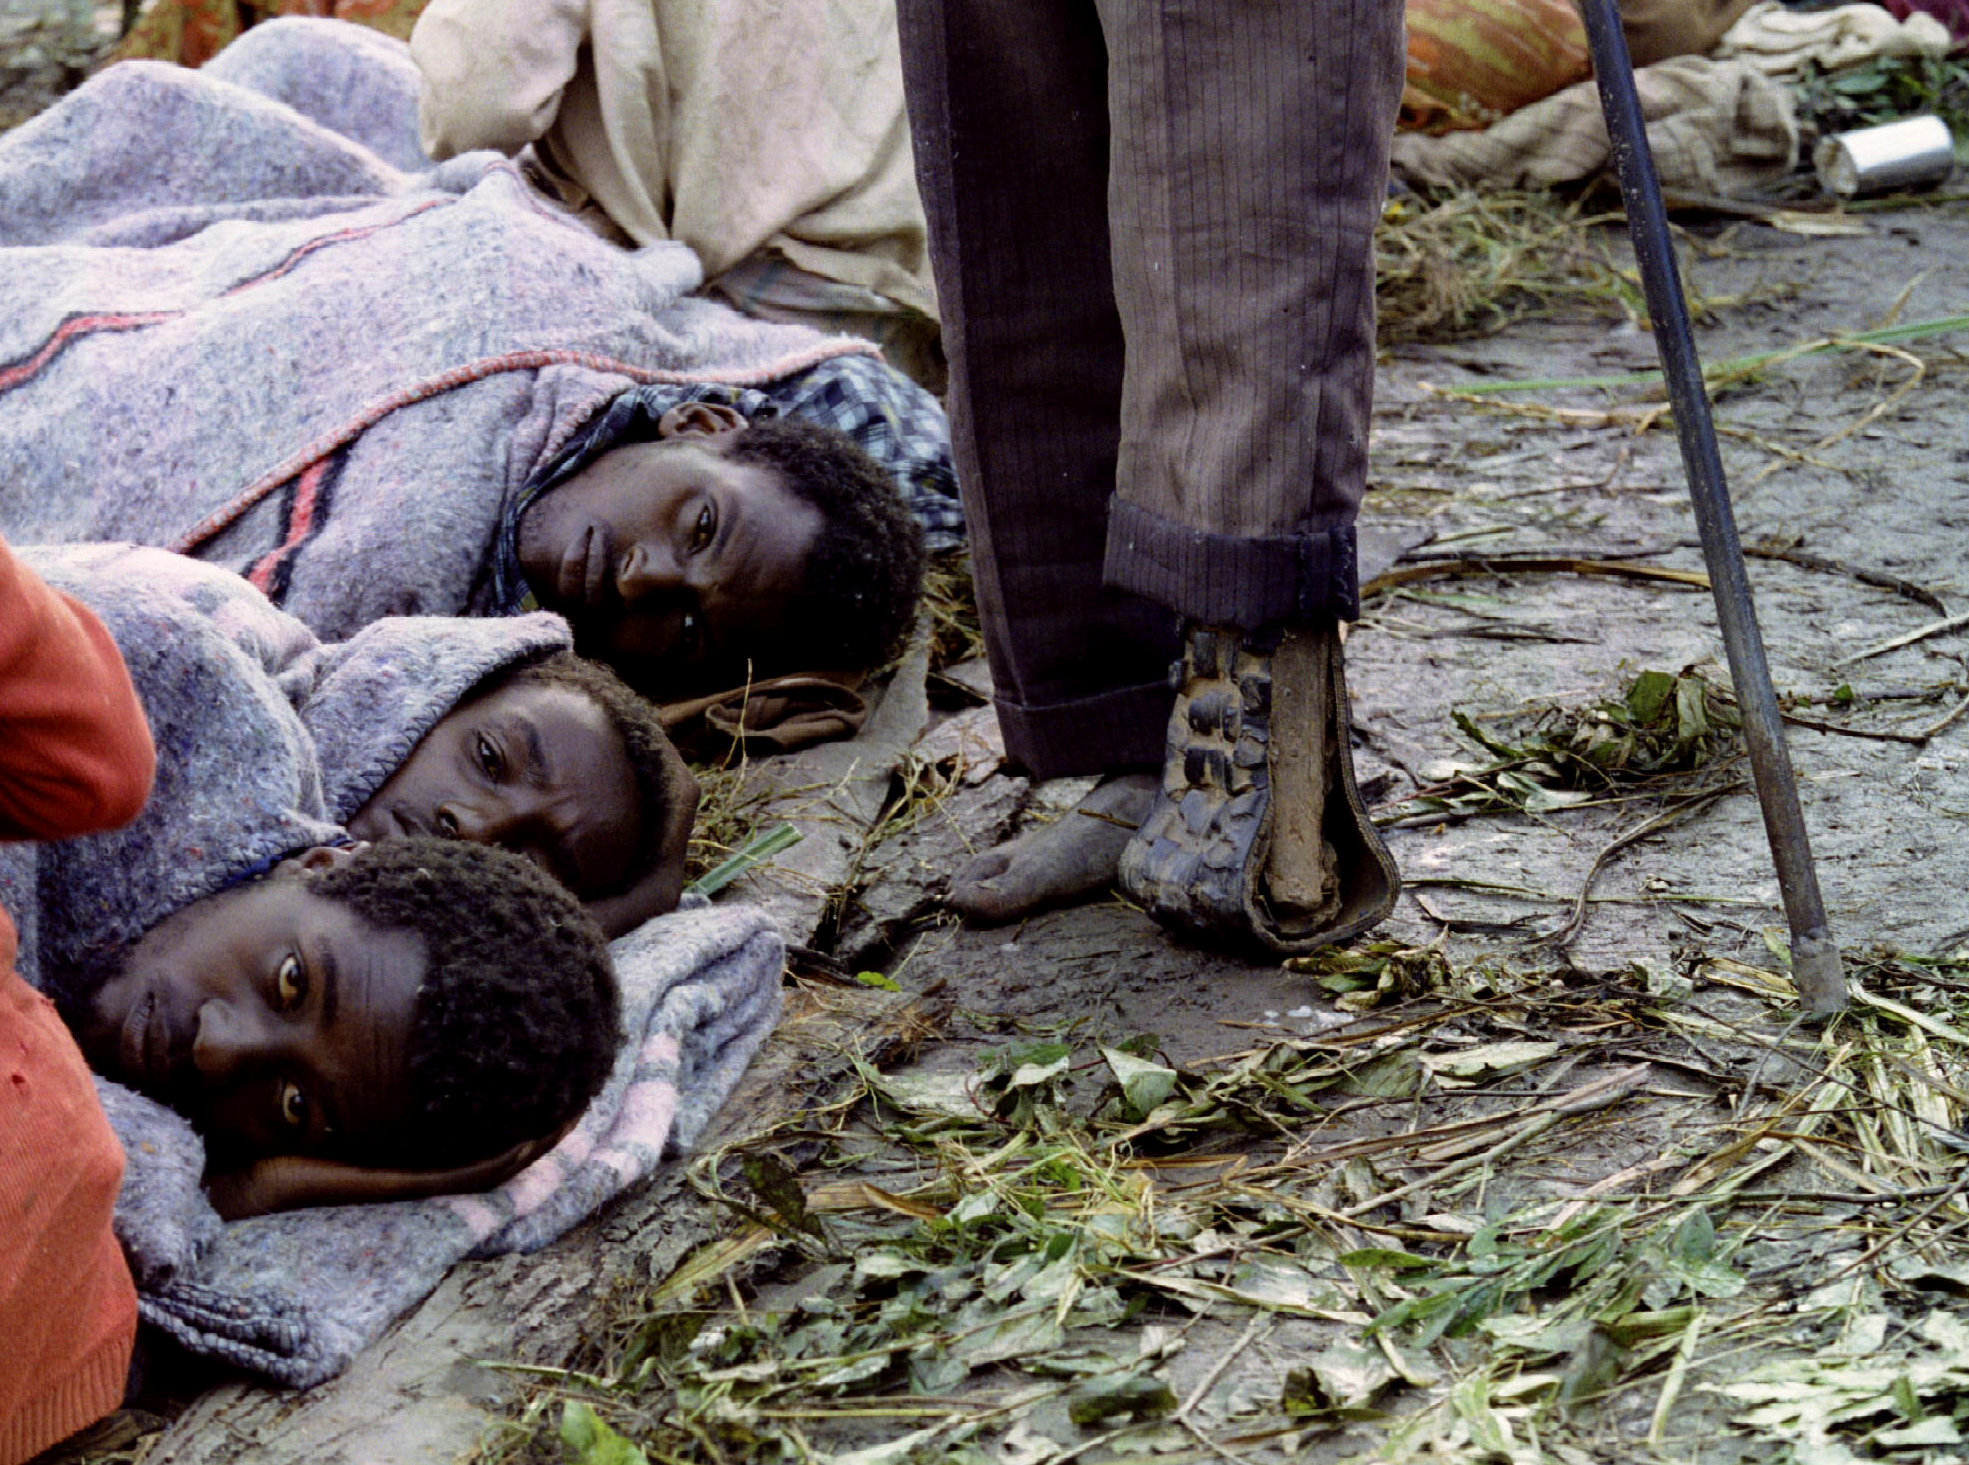 IN PHOTOS: Revisiting the horrors of the Rwanda genocide 25 years on